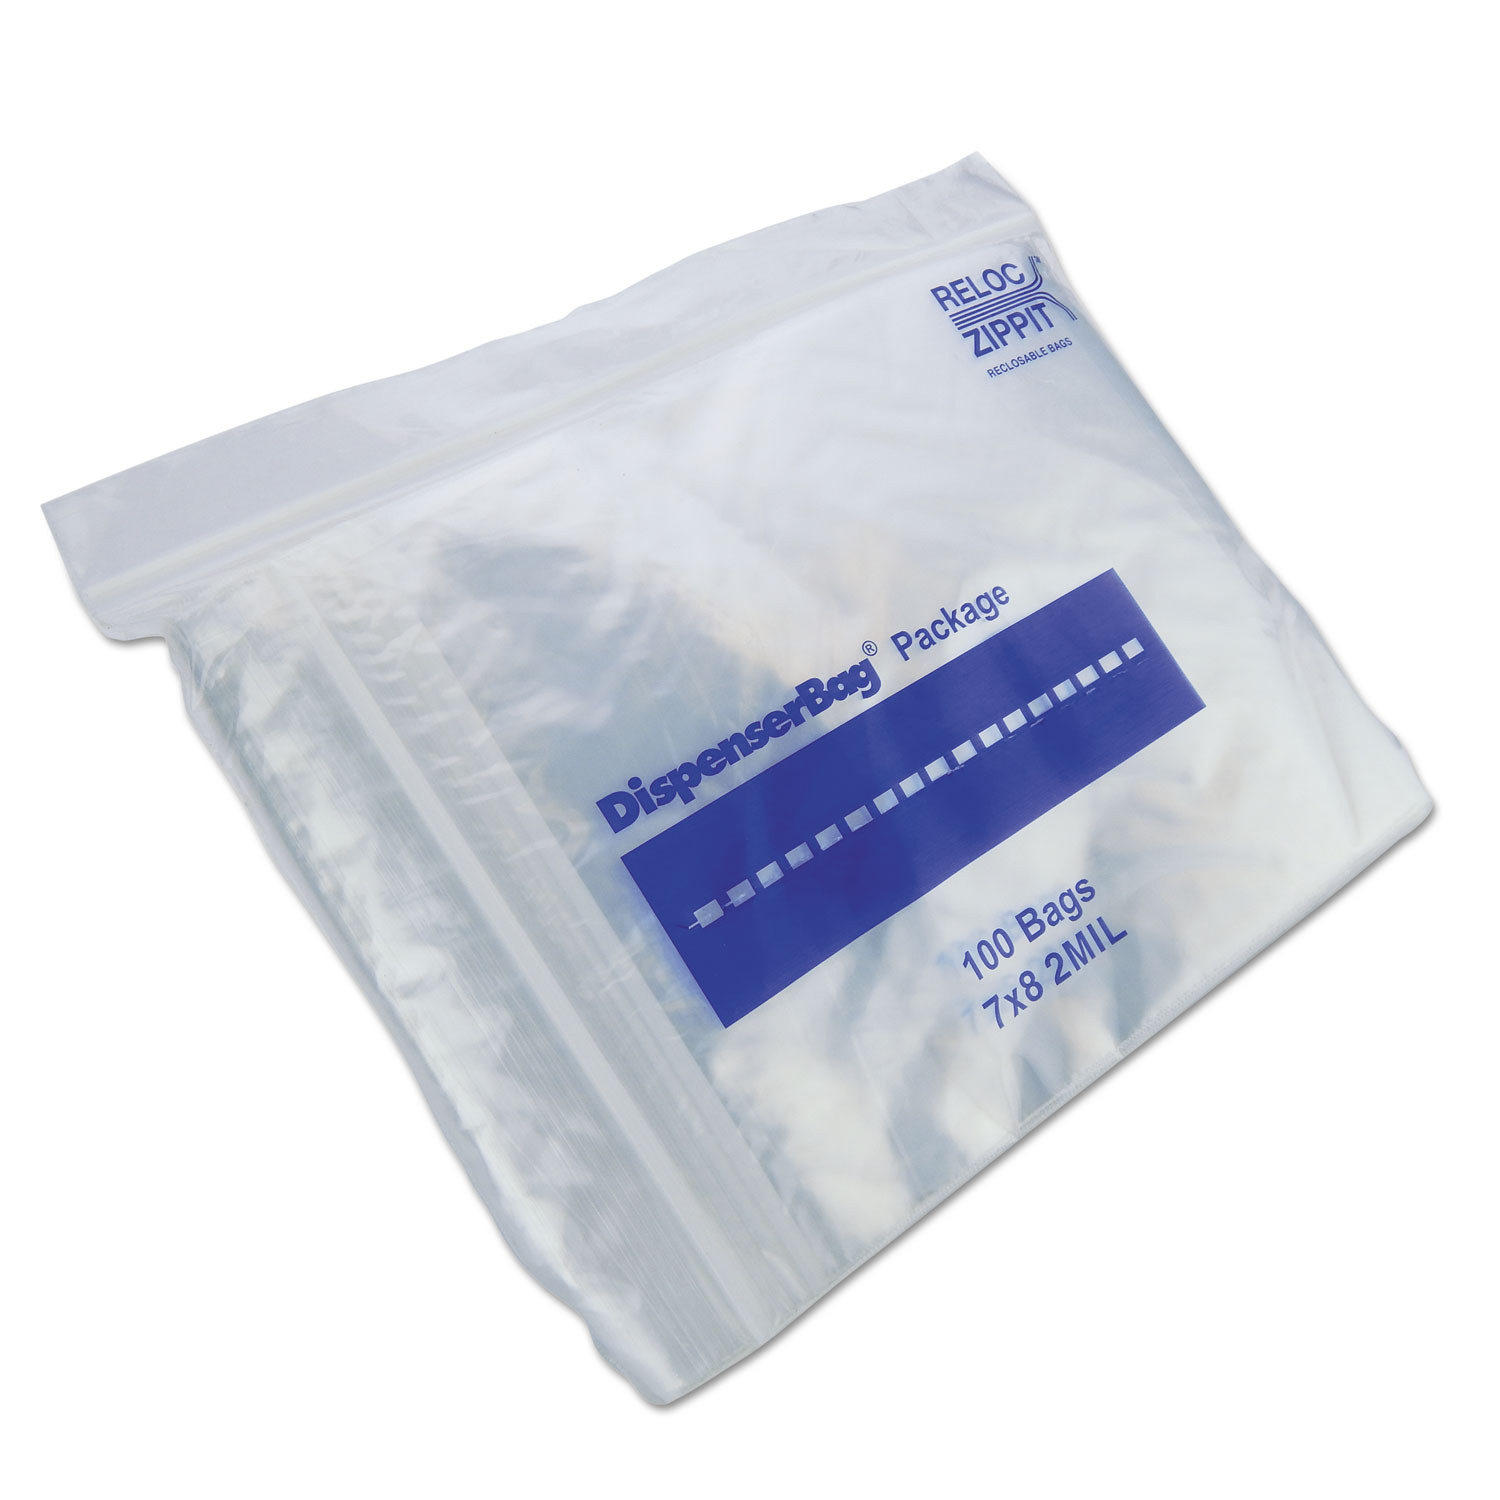 Zipper Freezer Bags, 1 gal, 2.7 mil, 9.6 x 12.1, Clear, 28 Bags/Box, 9  Boxes/Carton - Office Express Office Products